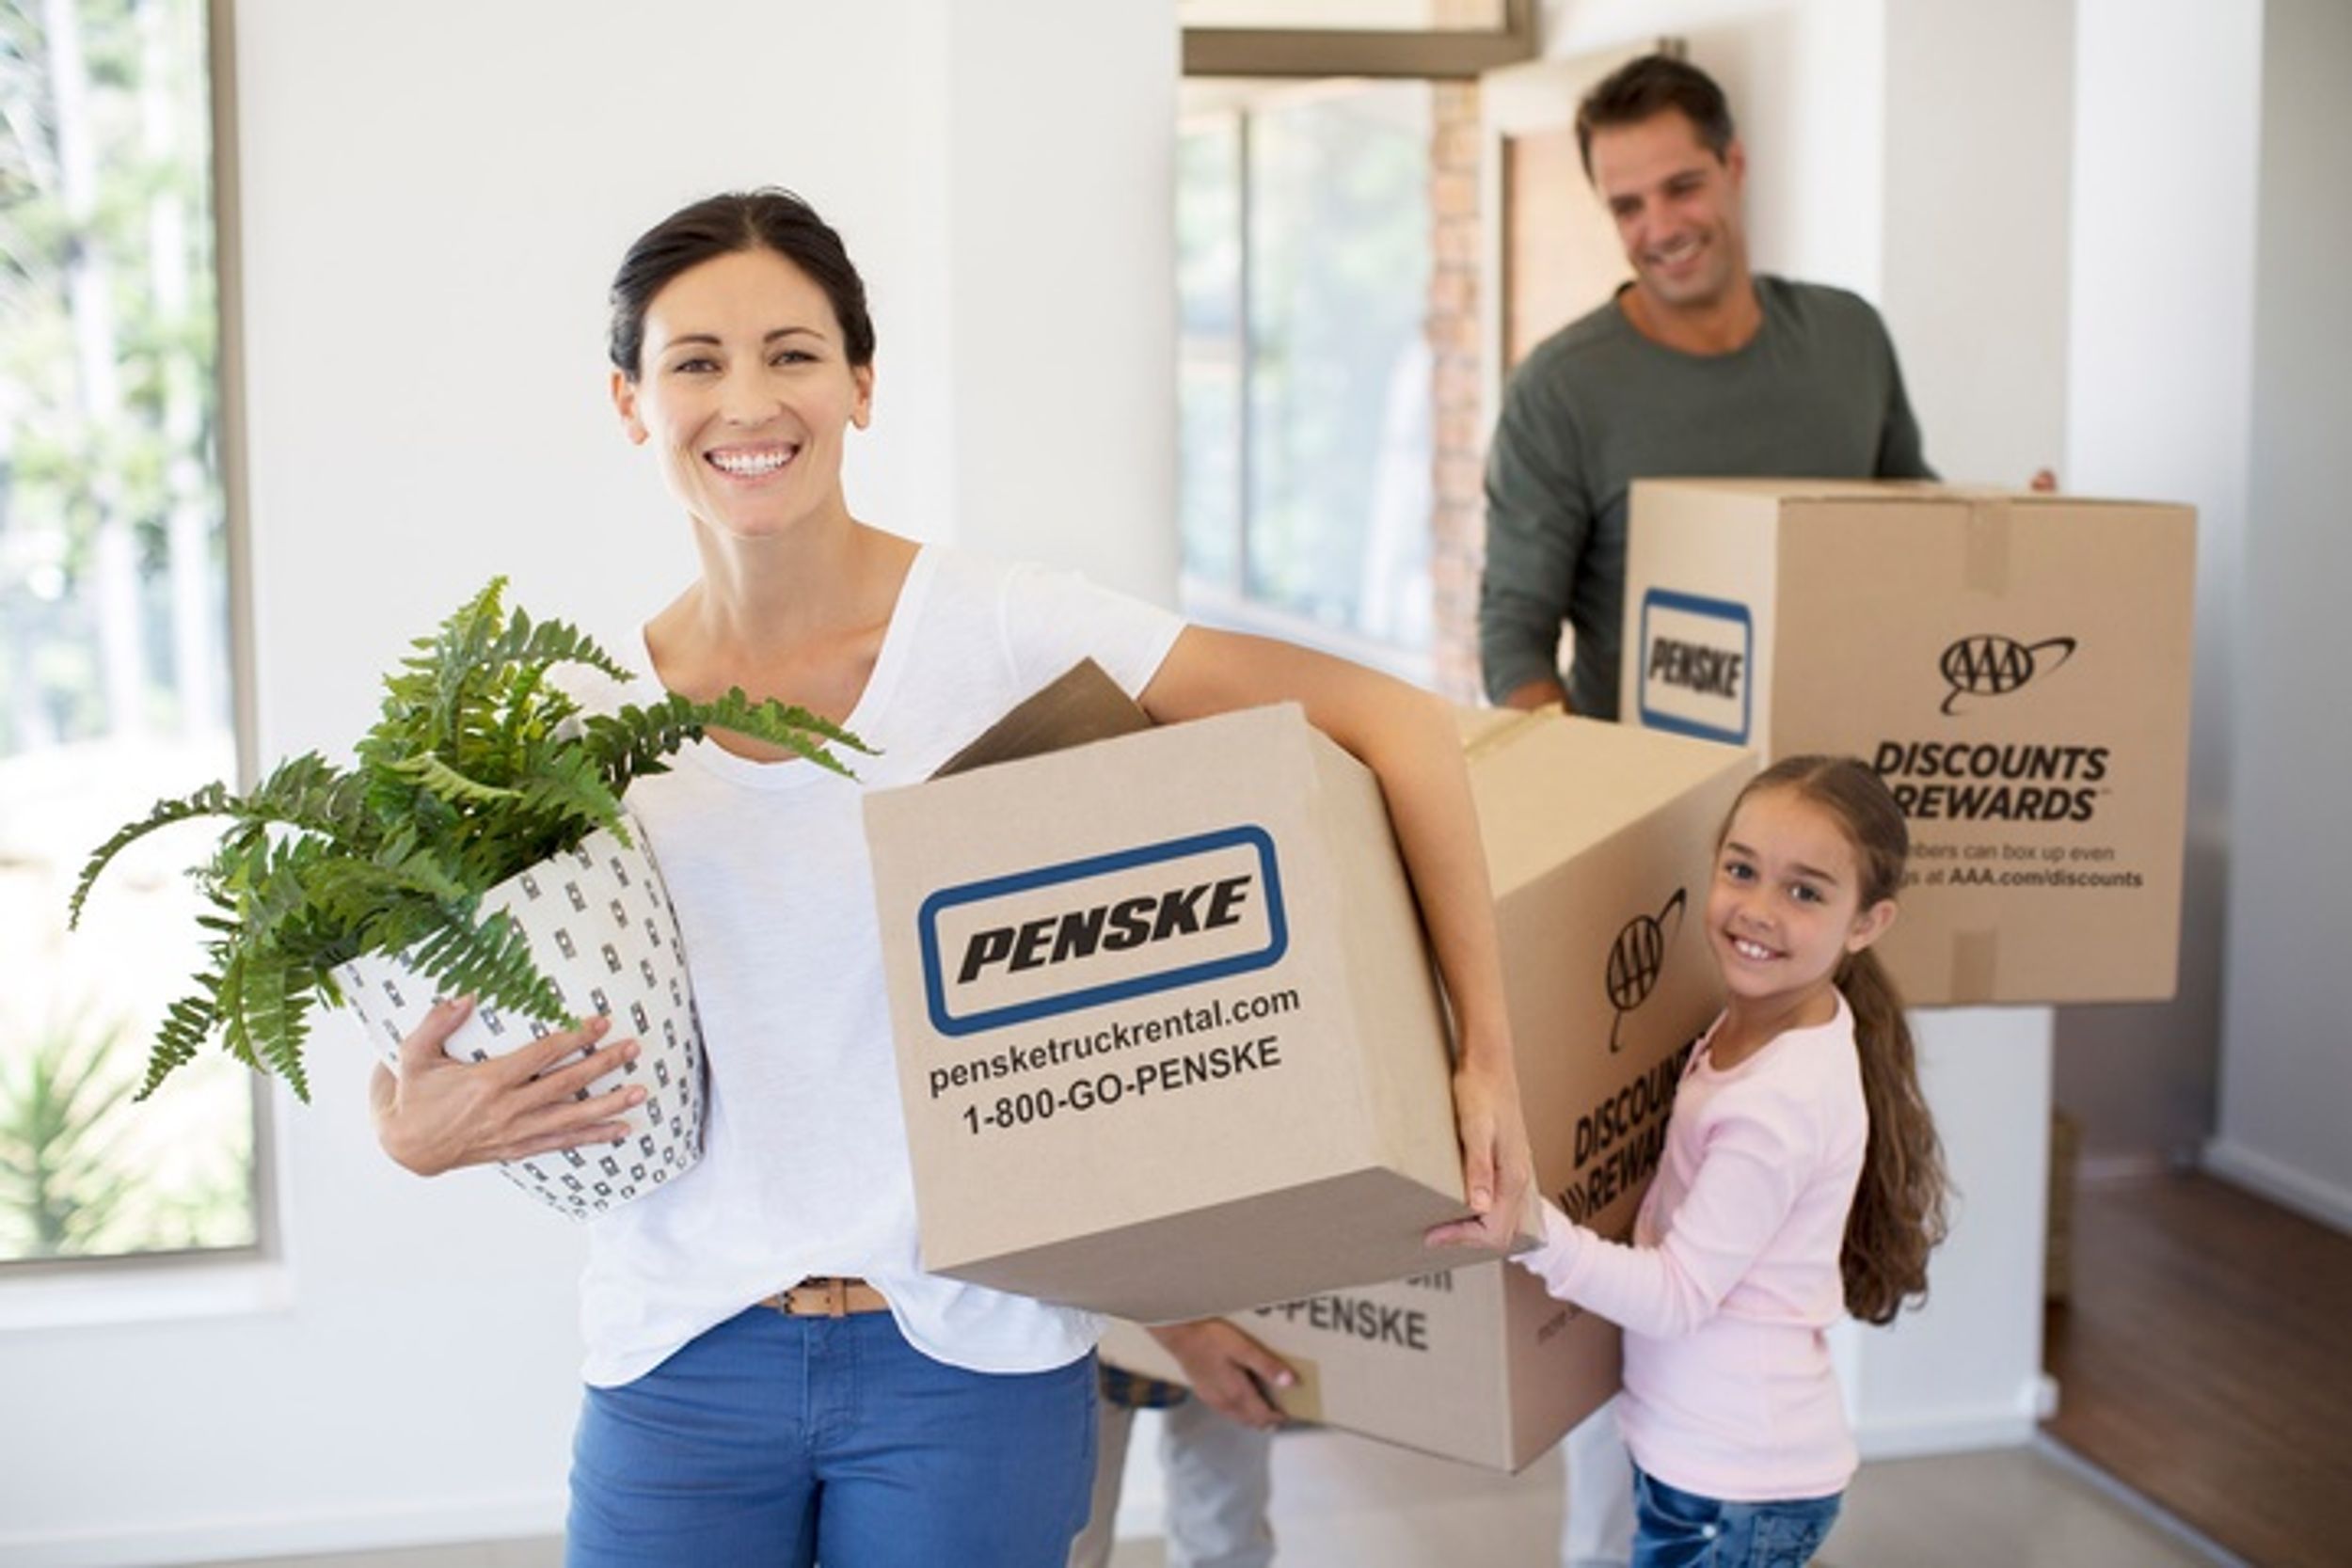 7 Tips to Make Your Moving Day a Success